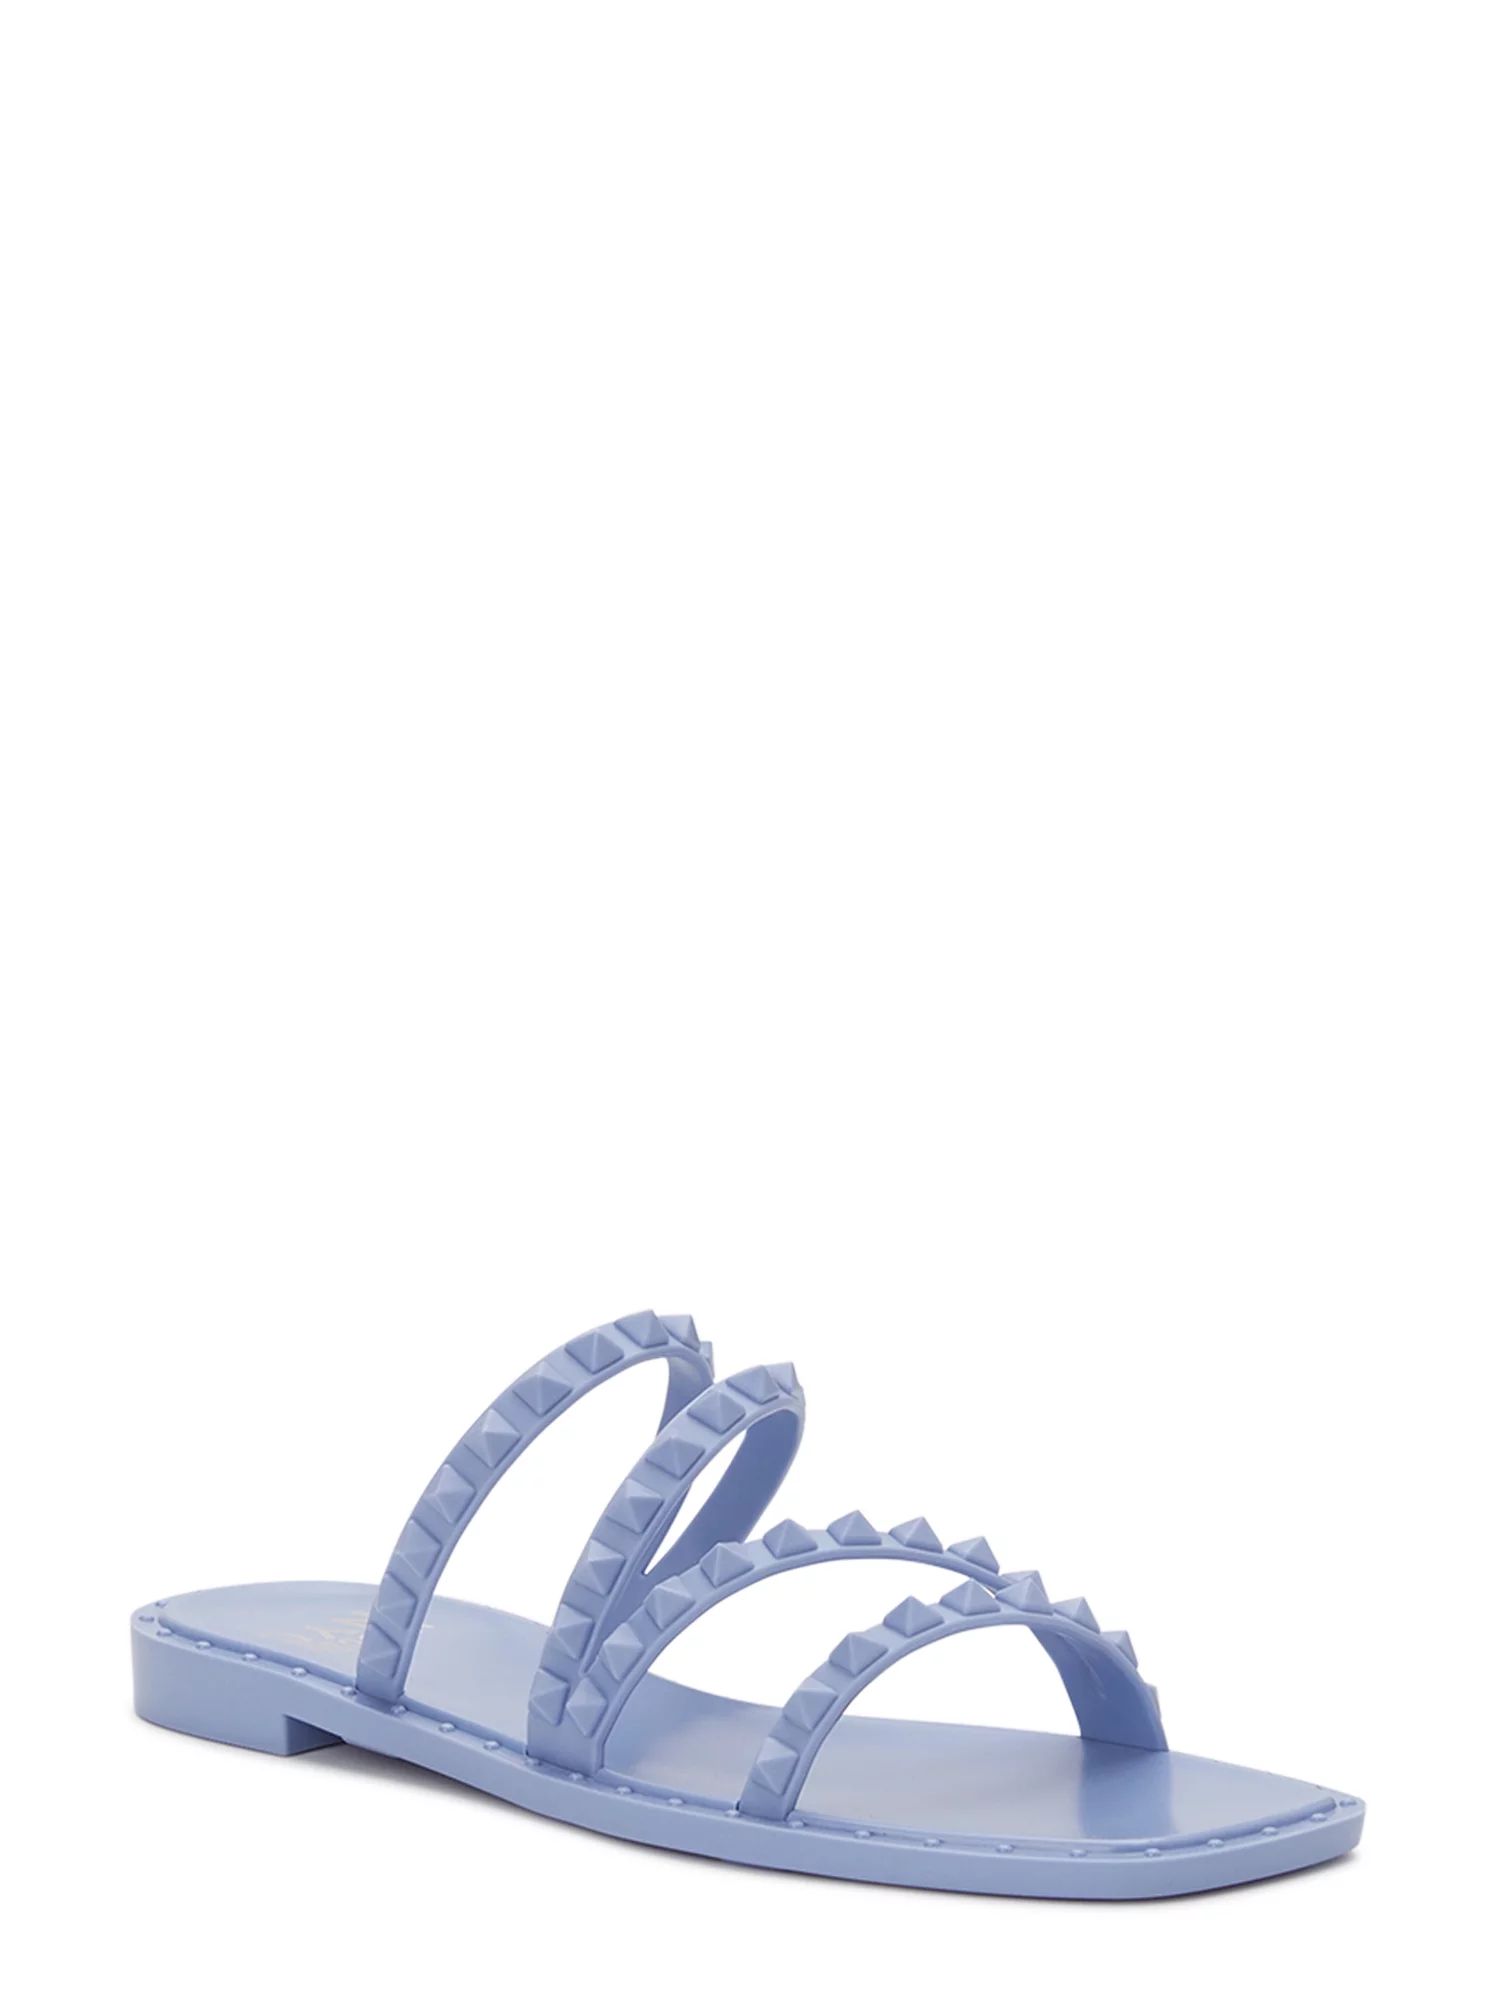 Madden NYC Women's Studded Strappy Jelly Slide Sandals | Walmart (US)